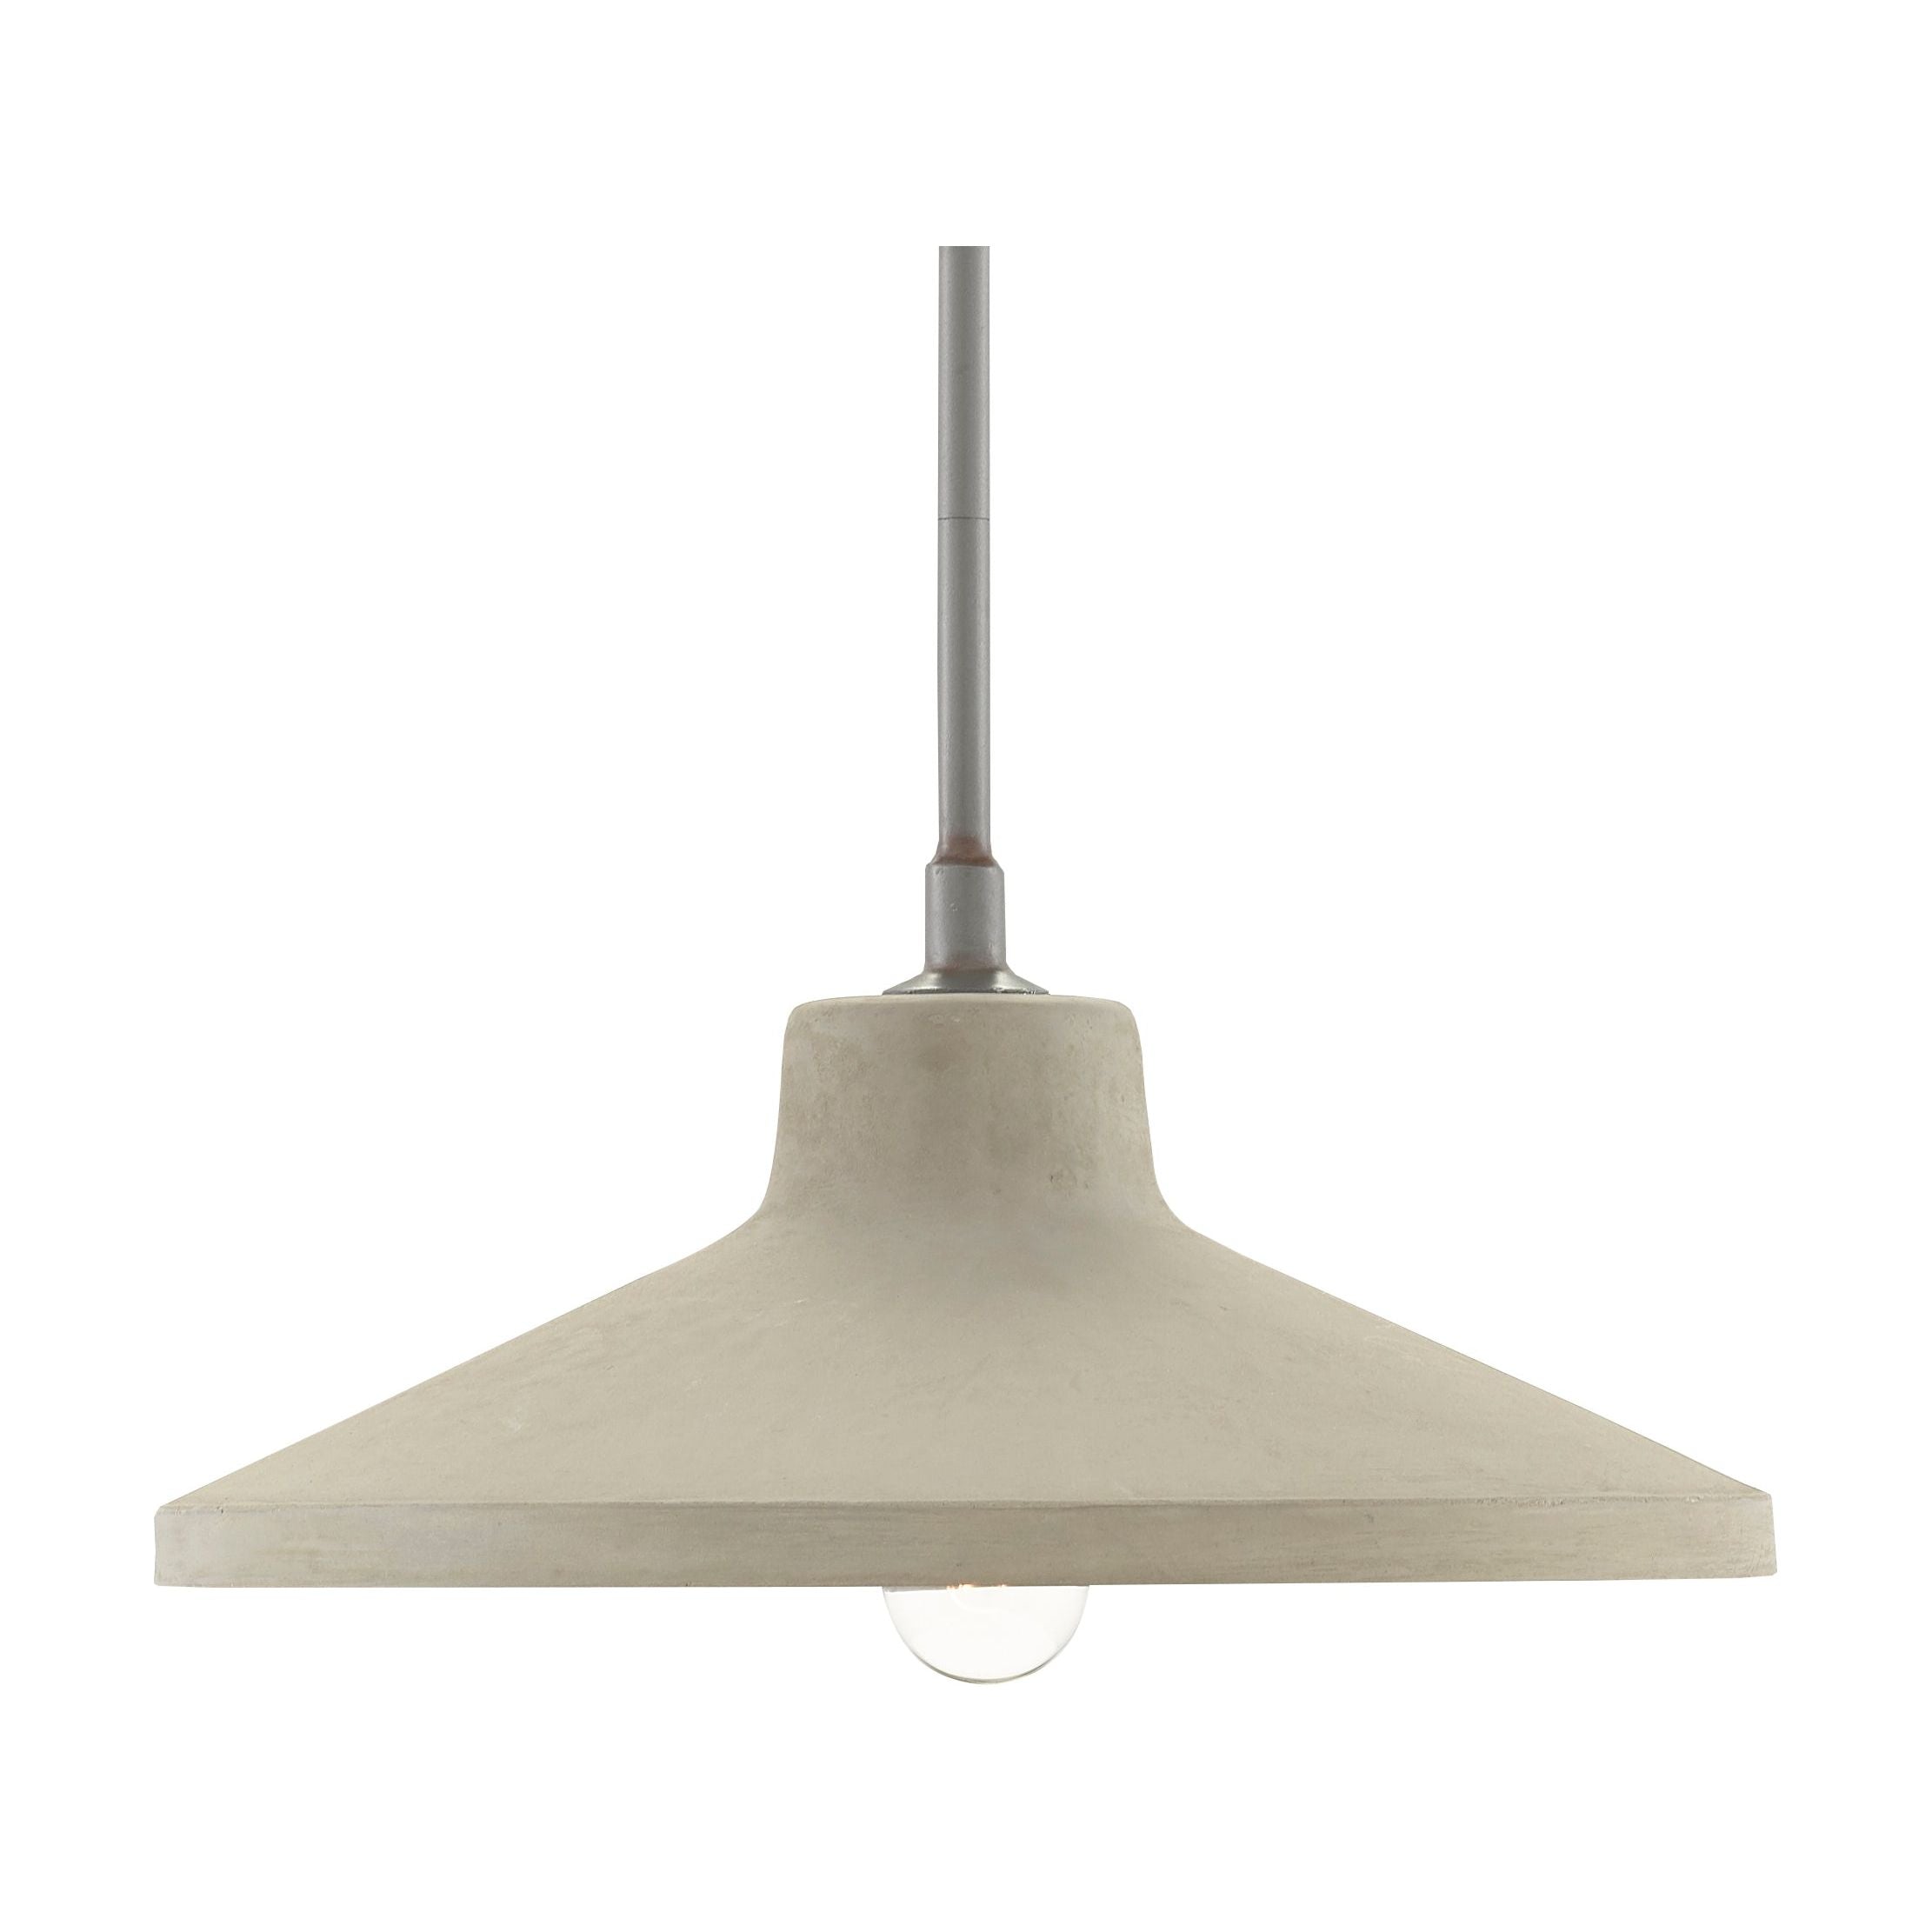 The Stonemoss Pendant, designed by Iian Thornton, has a shade made of hand-formed concrete in a Portland finish. The metal hardware, in a Hiroshi Gray finish, is as clean-lined as the shade to bring this gray pendant a pared-down profile. Amethyst Home provides interior design, new home construction design consulting, vintage area rugs, and lighting in the Park City metro area.